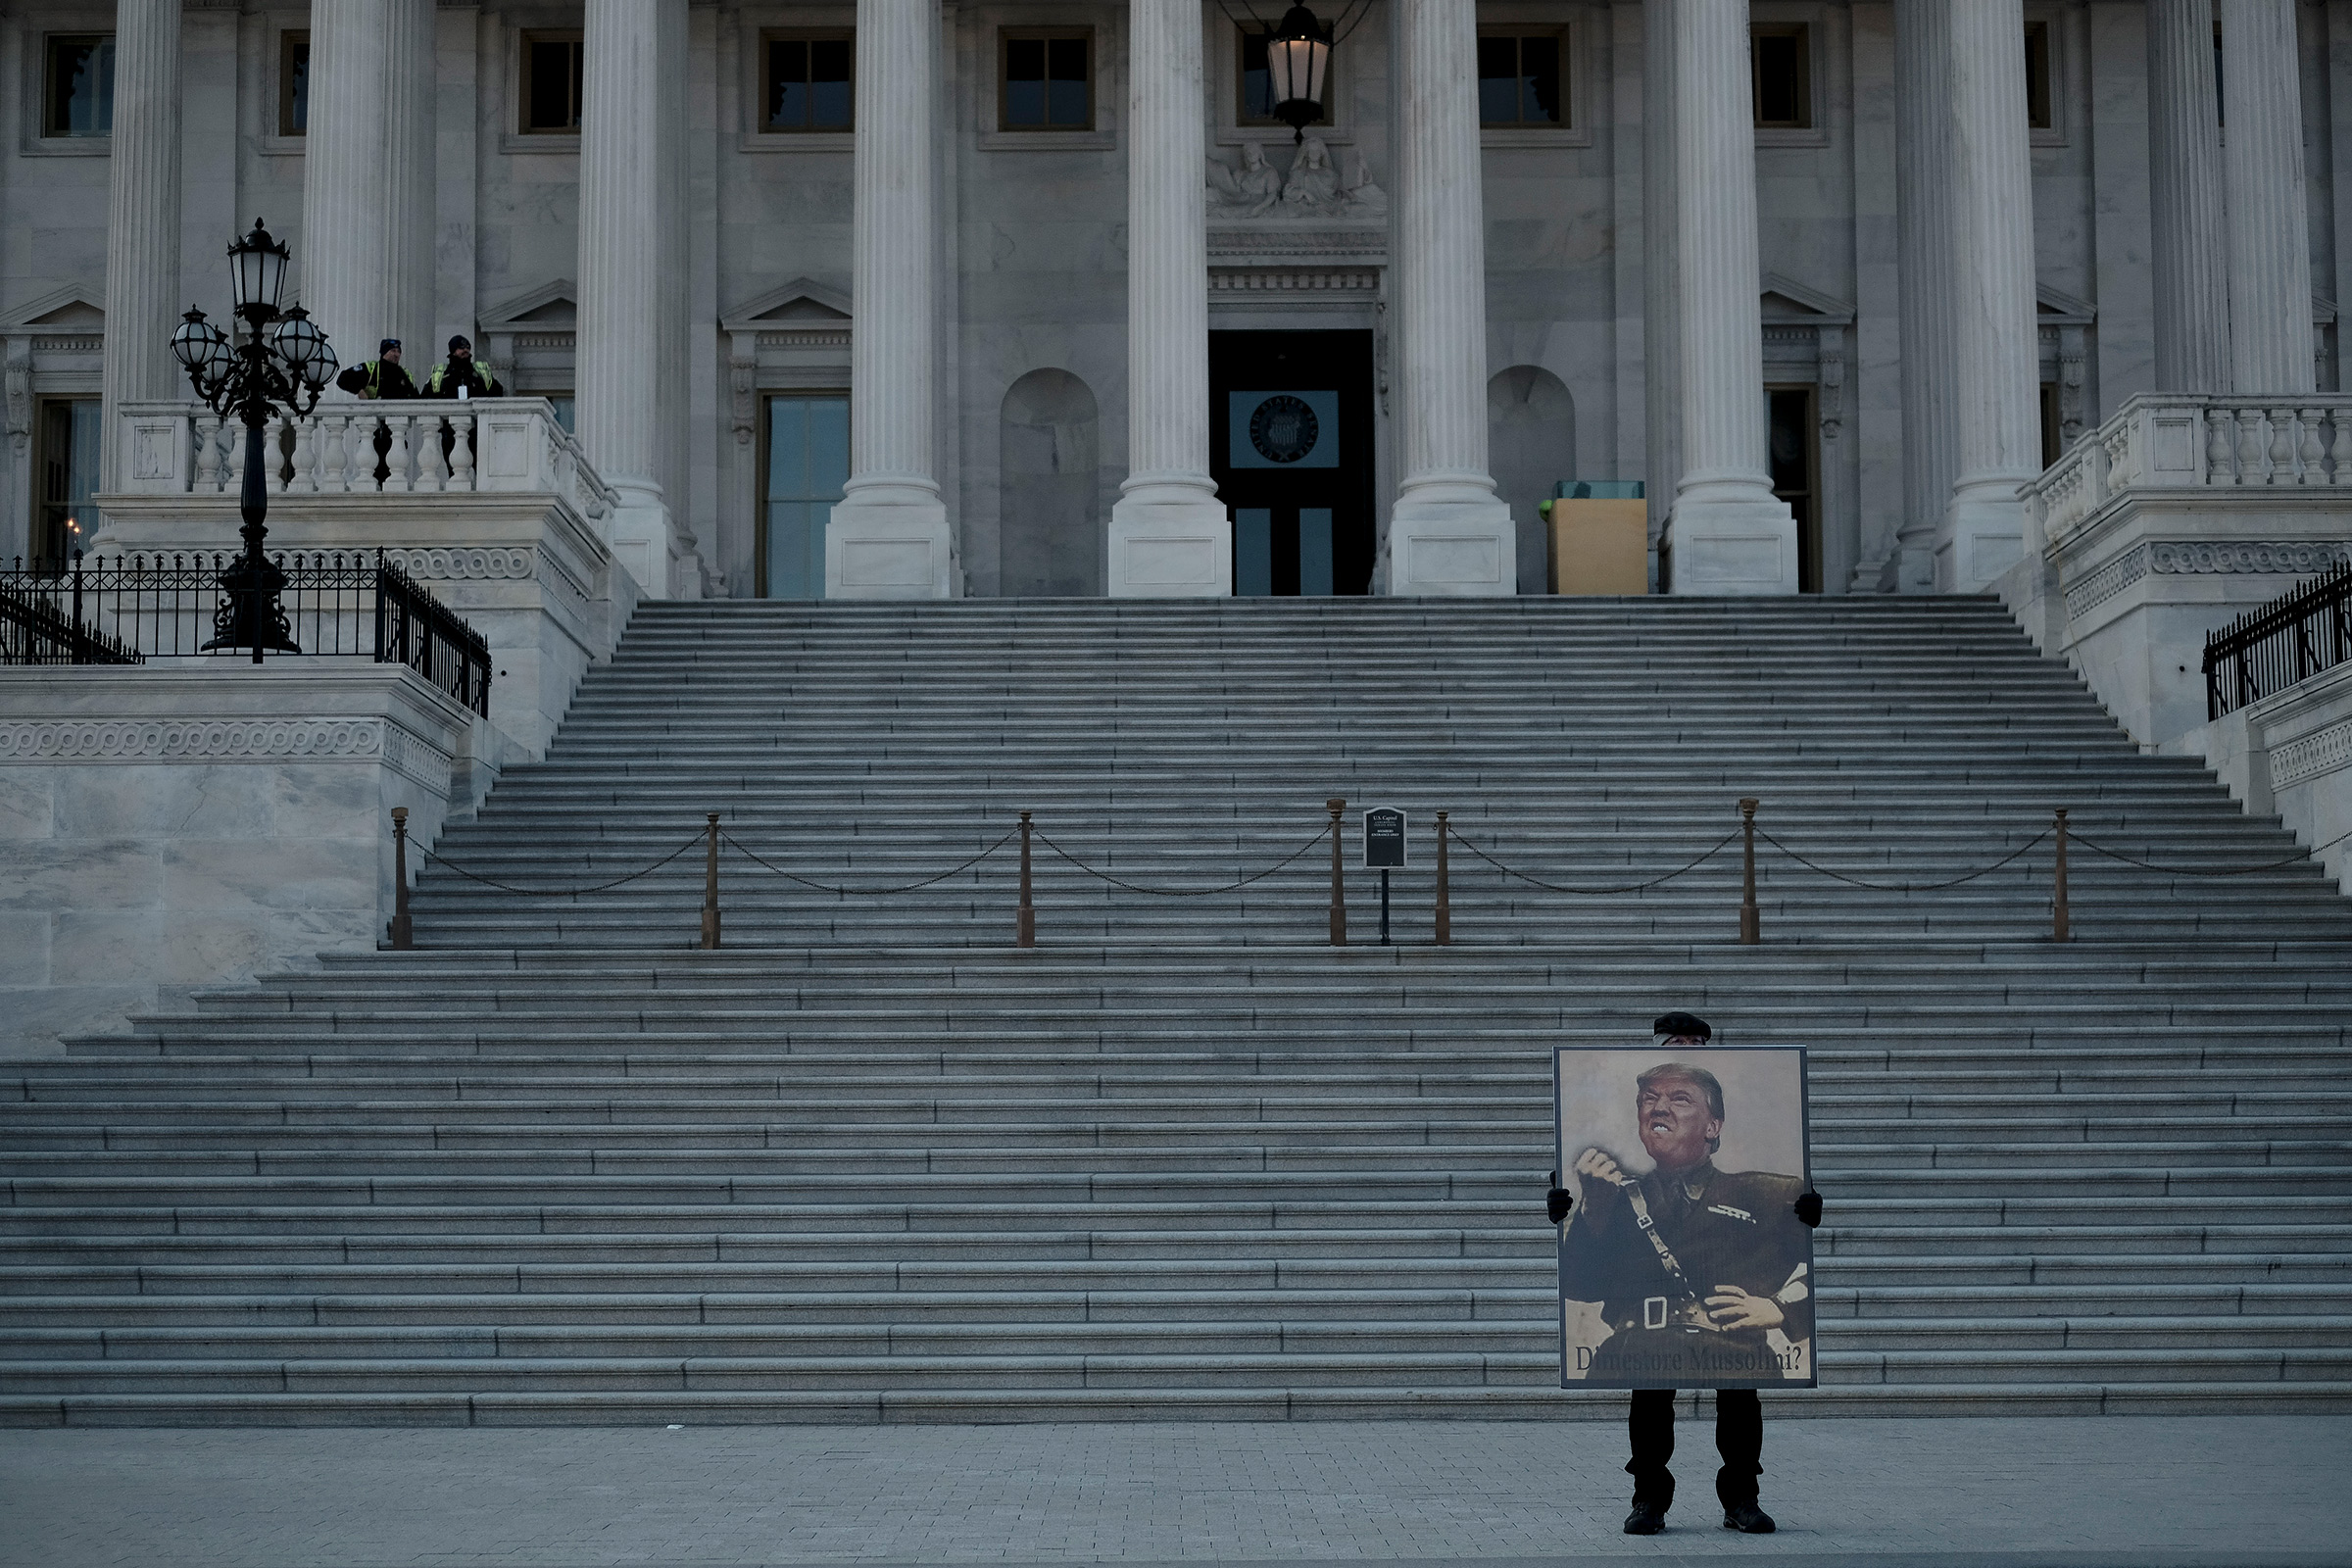 A protestor demonstrates against President Donald Trump in front of the Capitol during the senate impeachment trial in Washington, D.C., on Jan. 29, 2020. (Gabriella Demczuk for TIME)